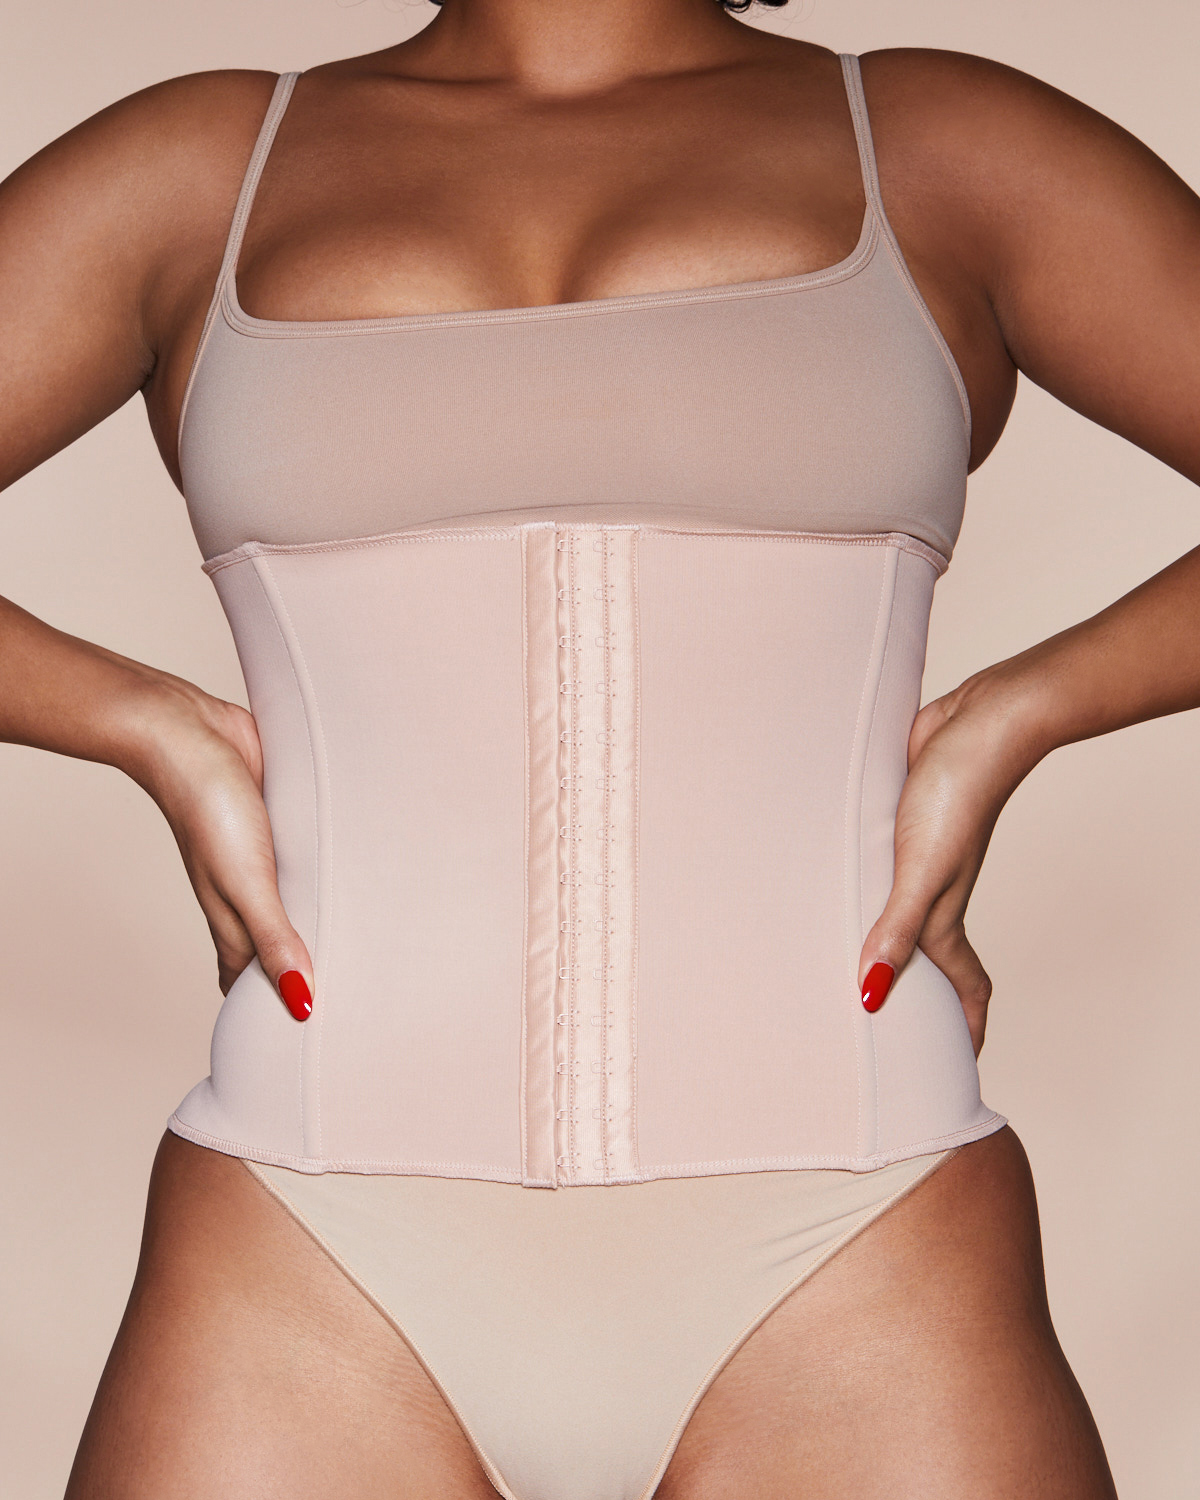 SKIMS on X: Tone and train your waist at home with the SKIMS Waist Trainer  — available now in Clay and Onyx and in sizes XXS - 4X. Shop the Waist  Trainer